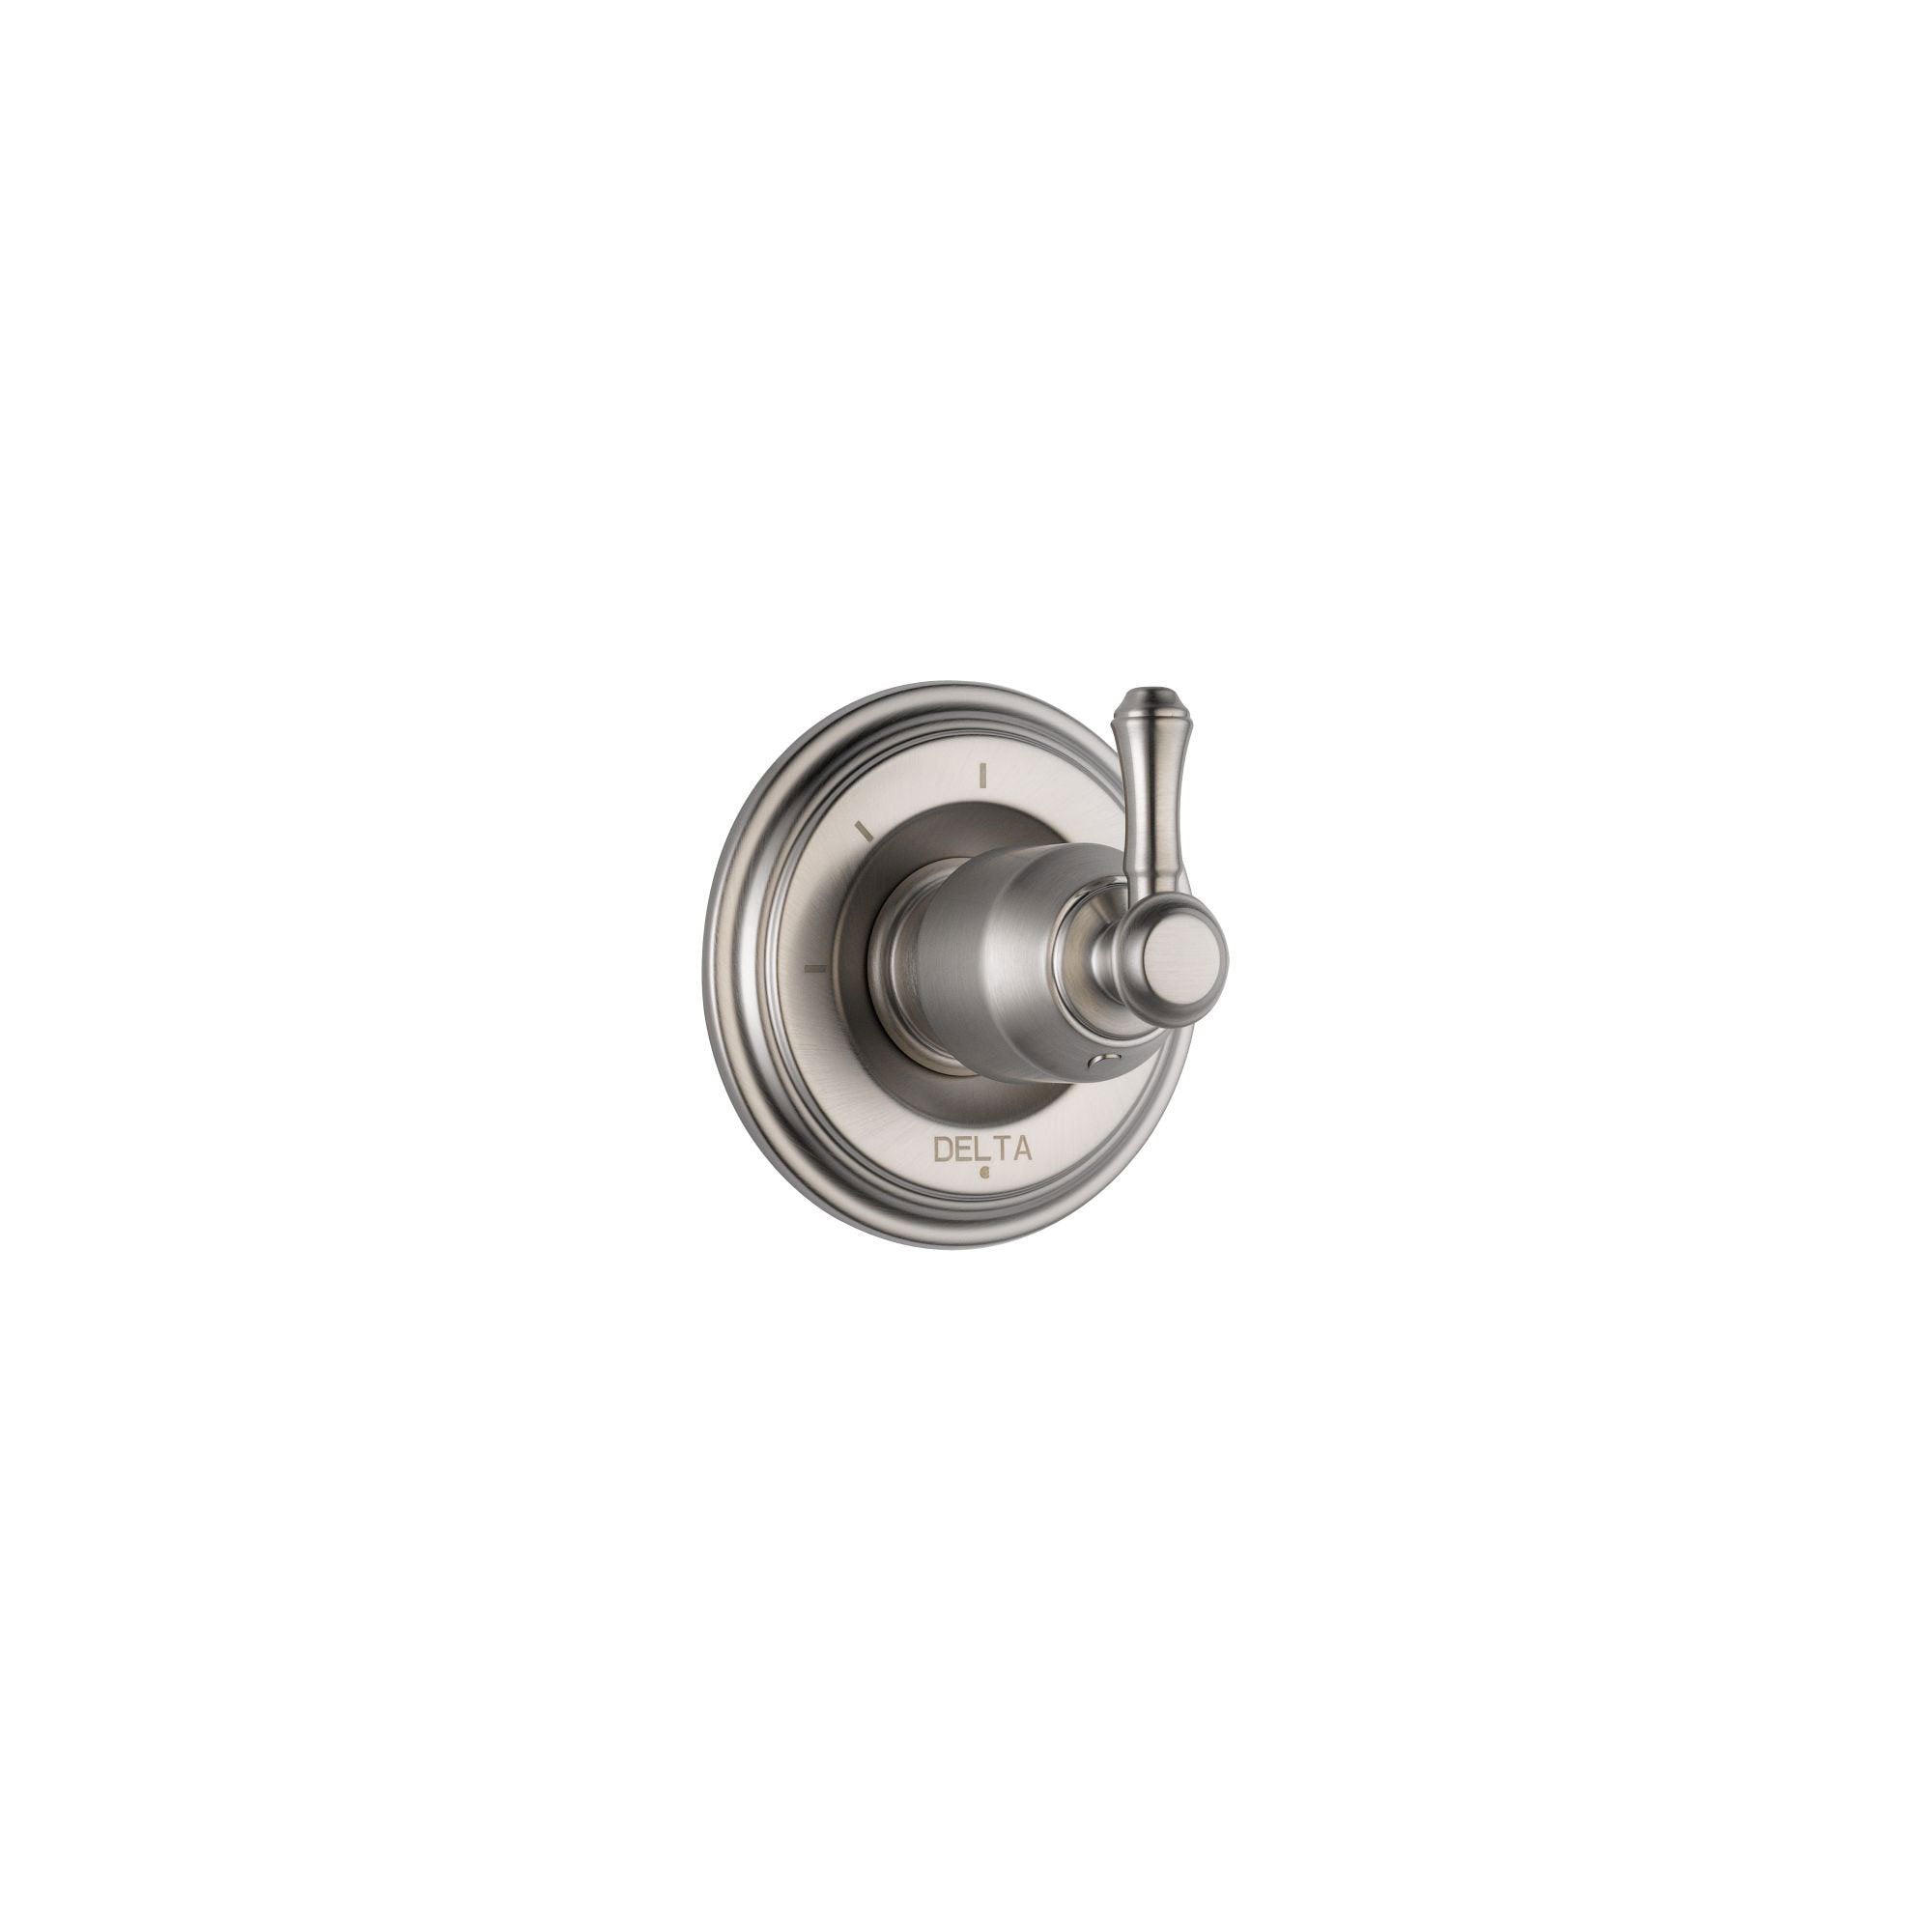 Delta Cassidy Stainless Steel Finish 3-Setting 2-Port Shower Diverter Fixture INCLUDES Rough-in Valve and Single Lever Handle D1291V